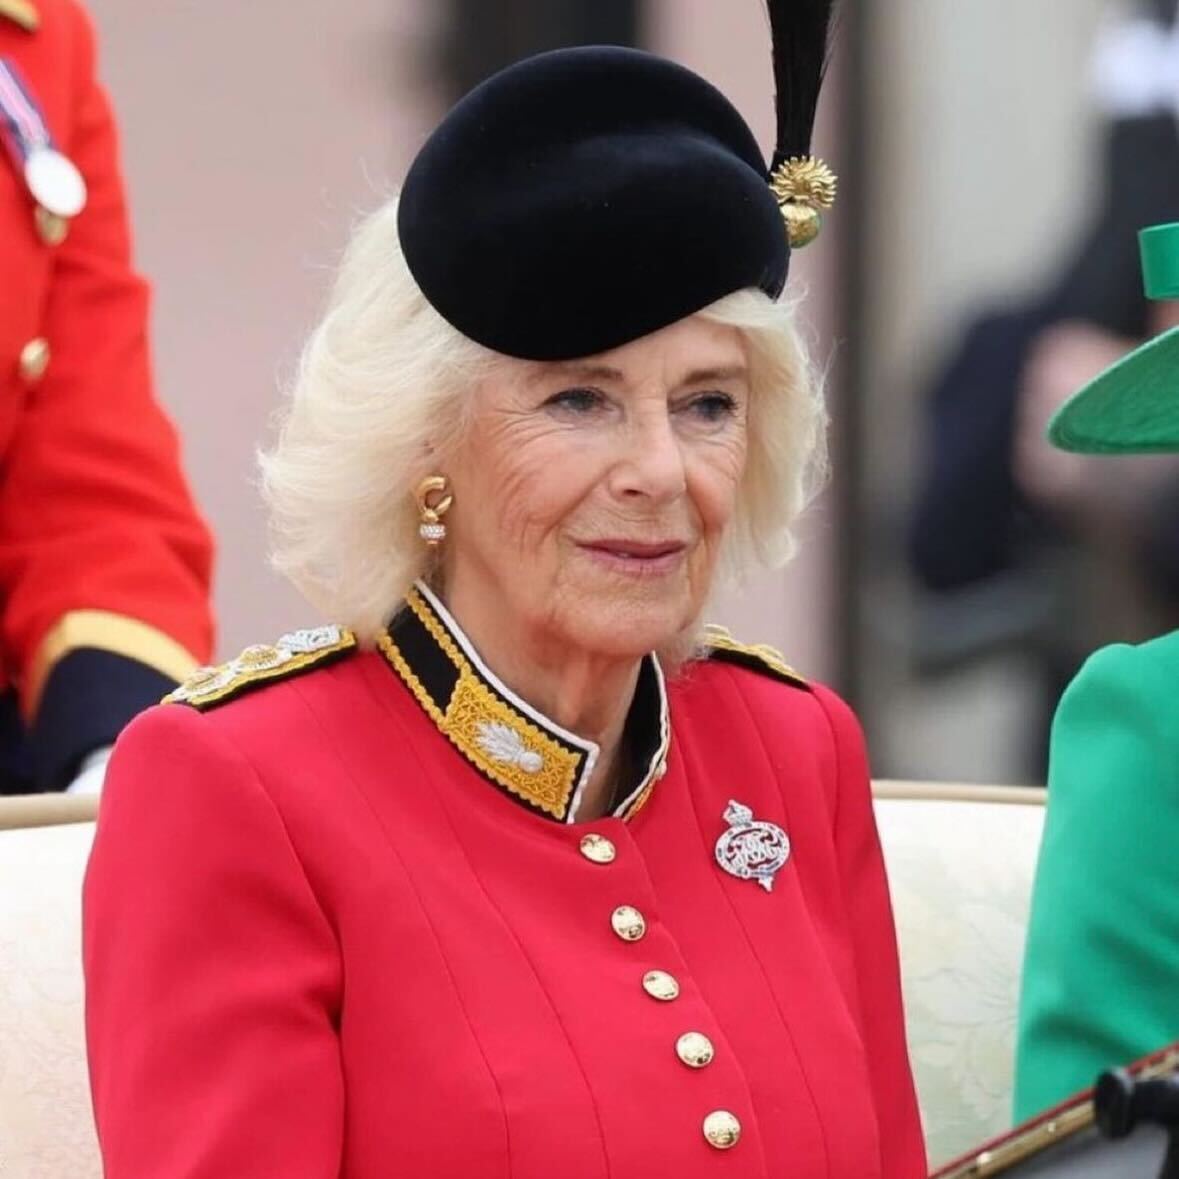 The poignant jewellery worn by the royal ladies at Trooping the Colour ...